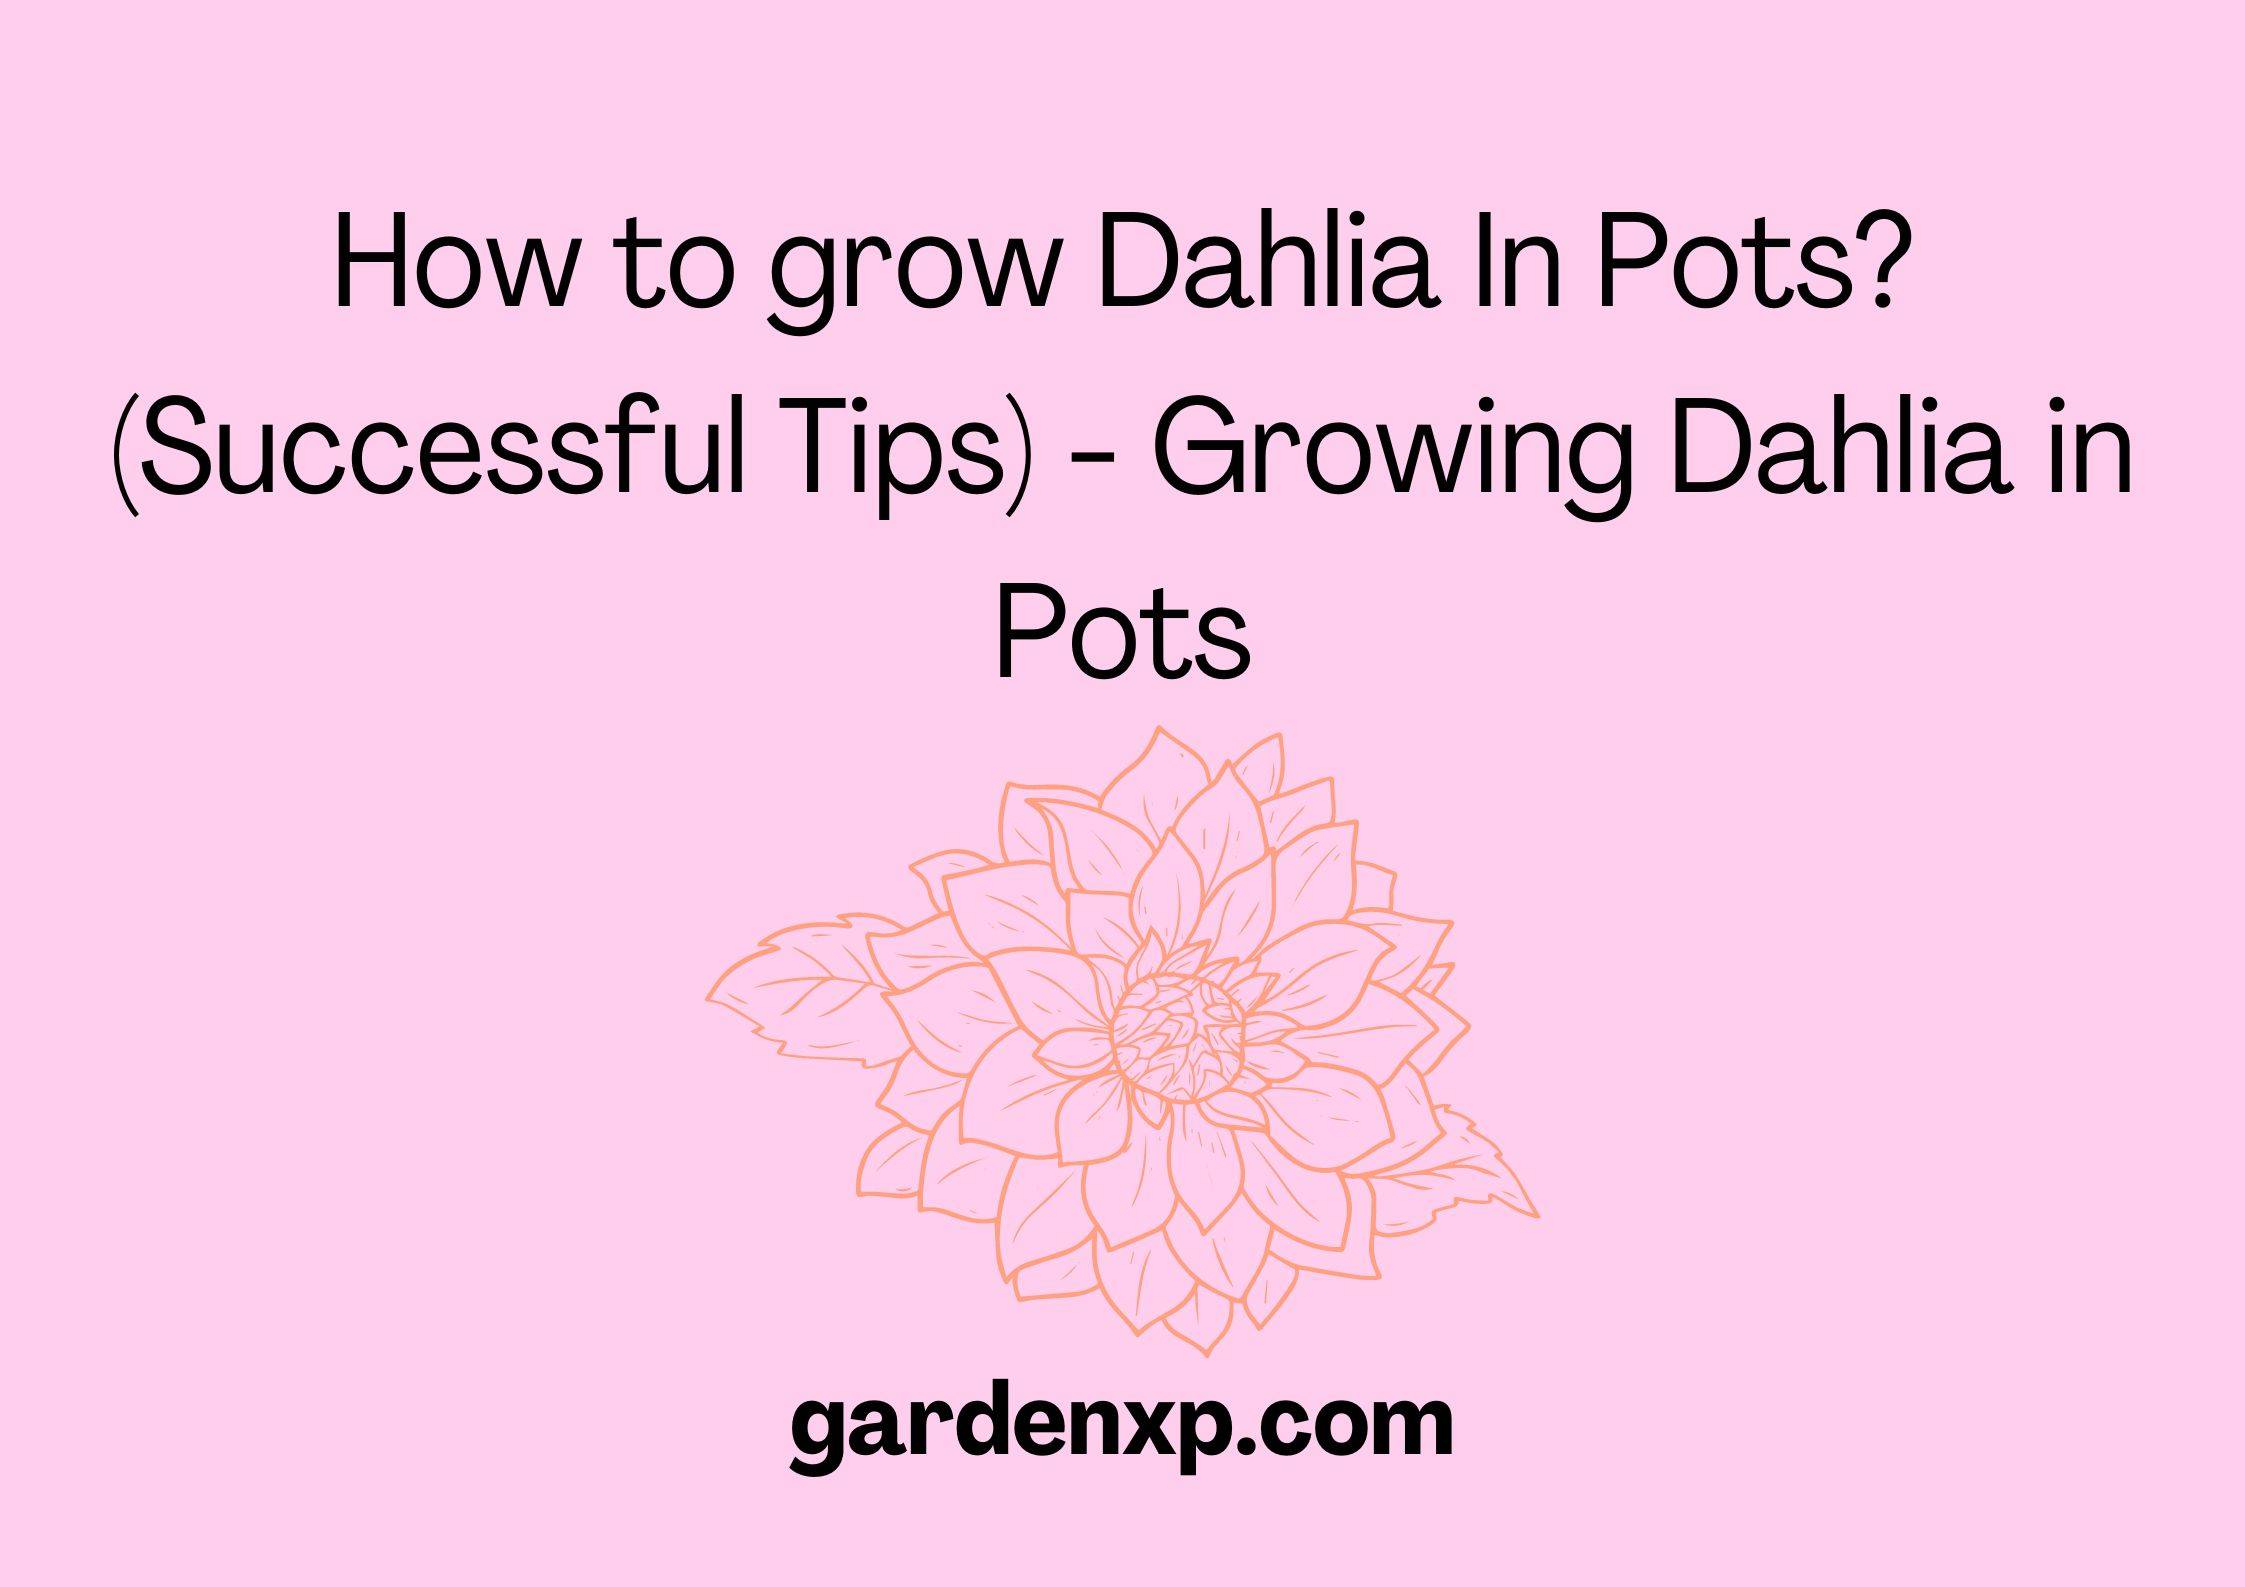 How to Grow Dahlias In Pots? (Successful Secret Tips)